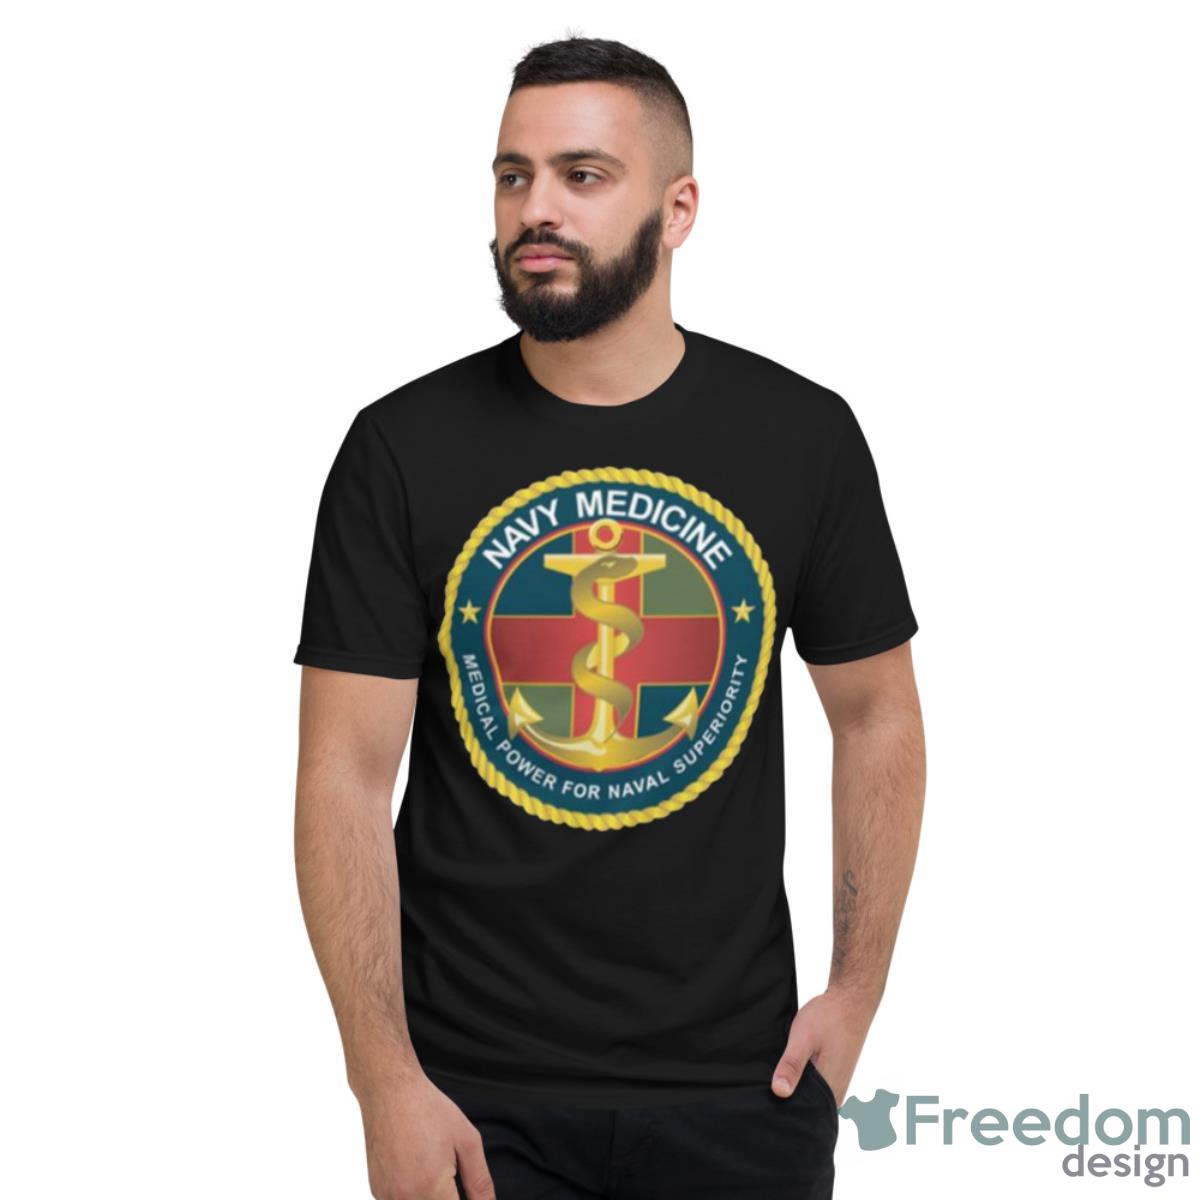 Navy Medicine Medical Power For Naval Superiority X 300 Shirt